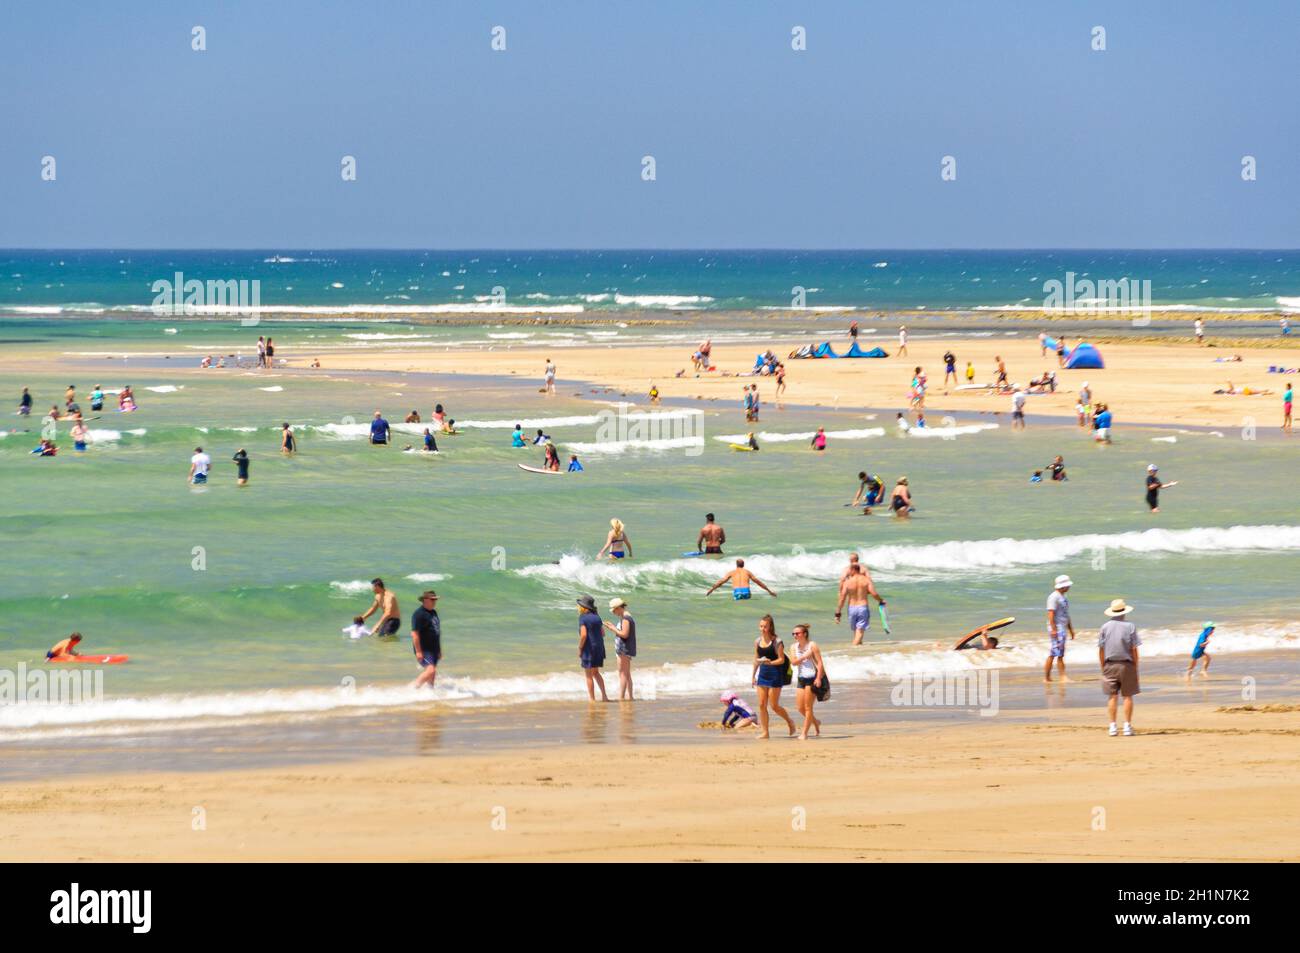 Vacationers and locals alike have a great time on the sandy Front Beach at Point Danger - Torquay, Victoria, Australia Stock Photo